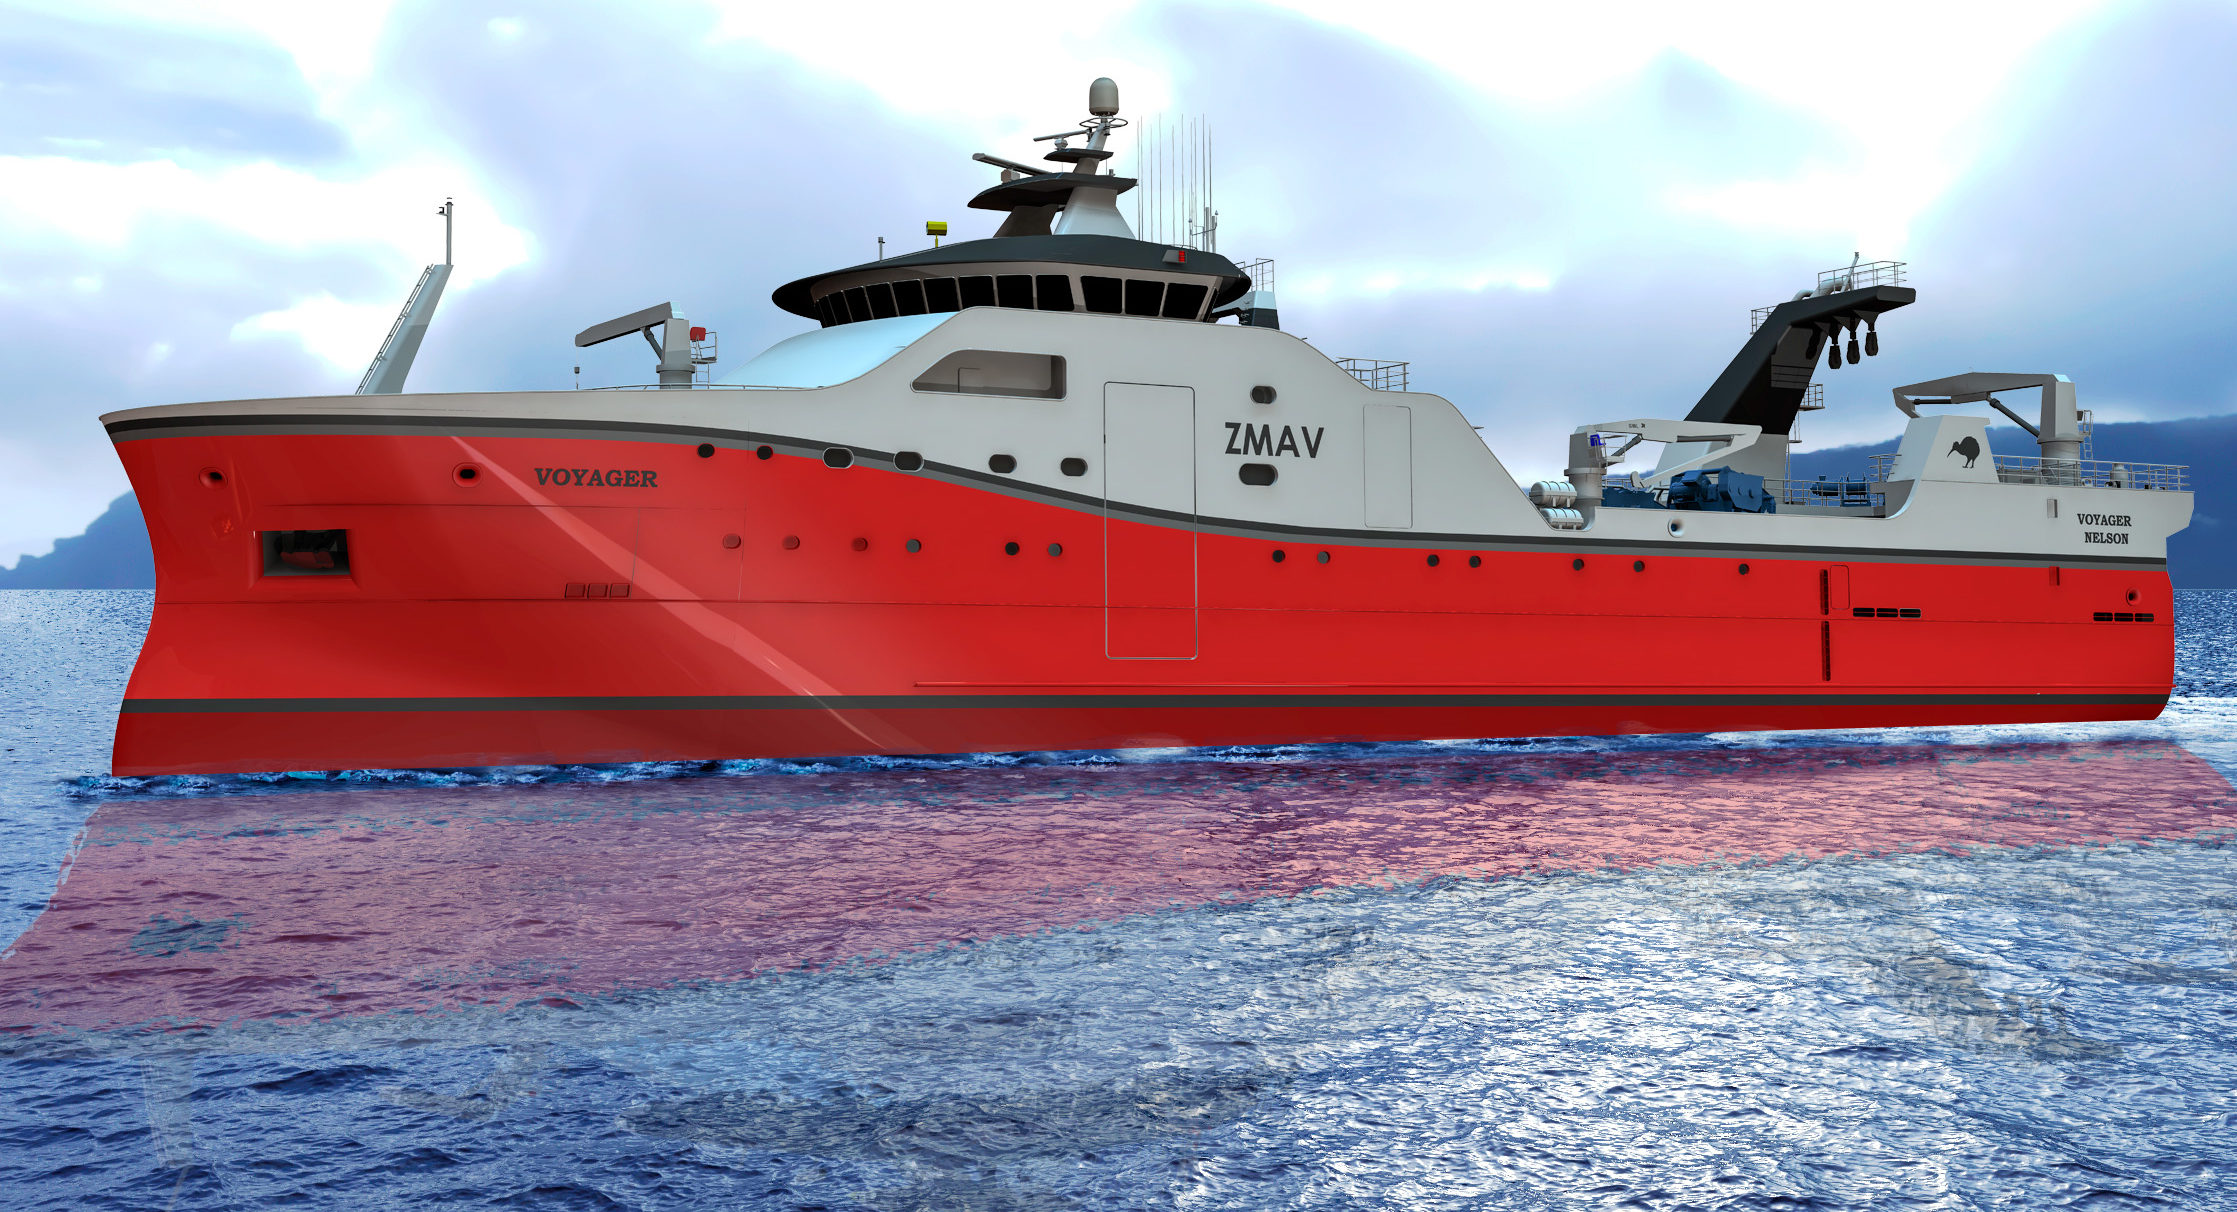 NZ's Talley's orders new 79m fishing, factory vessel - Undercurrent News